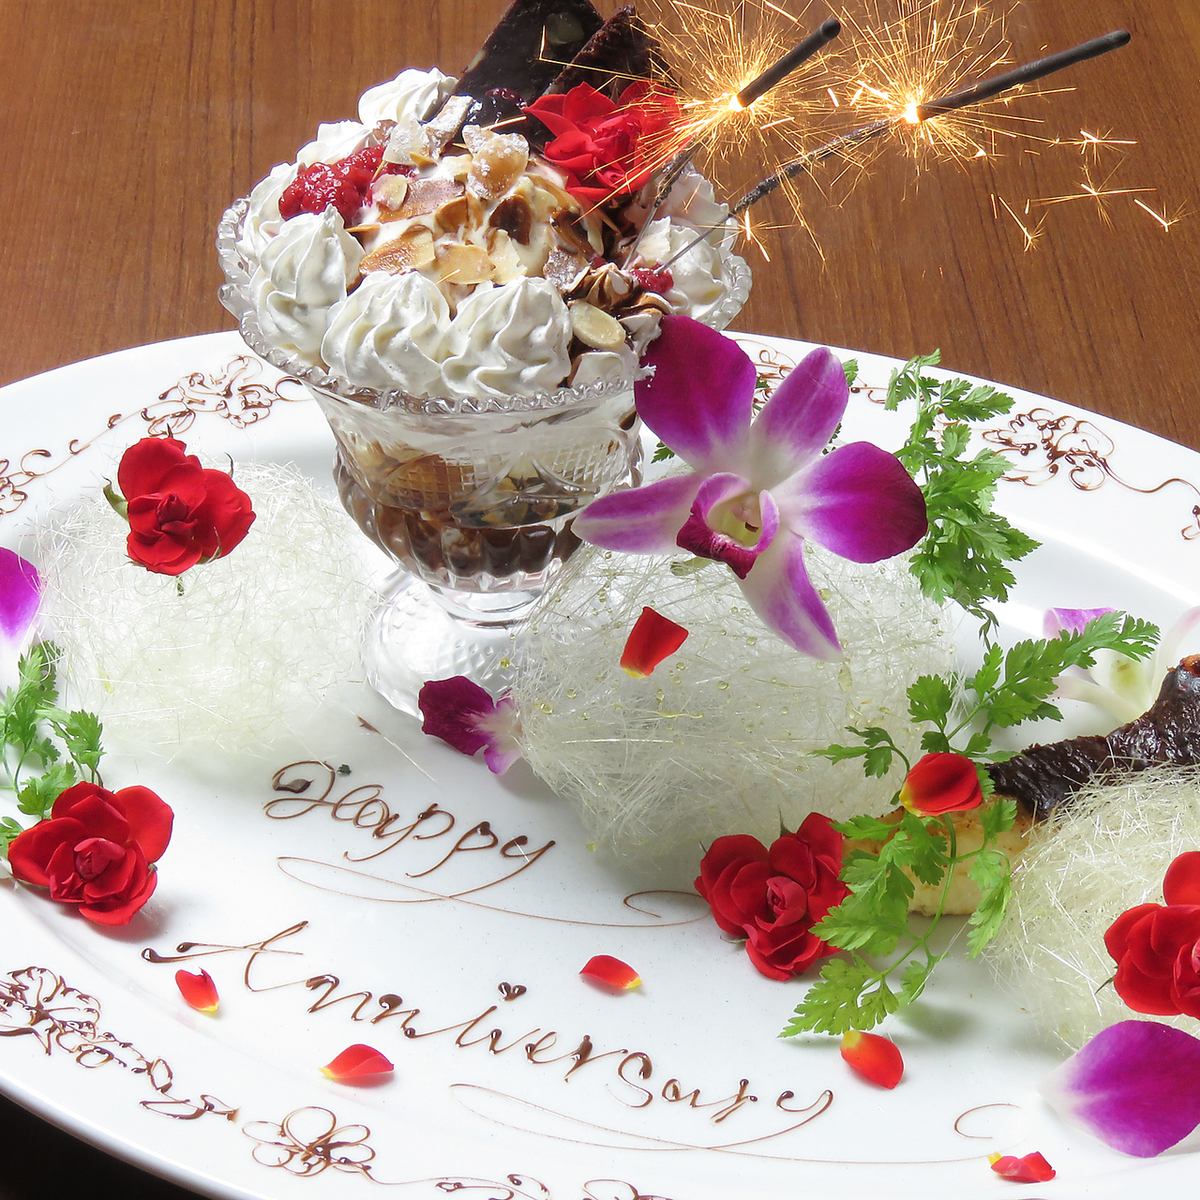 For birthdays and anniversaries, Butcher's Yajuro has a great atmosphere and authentic cuisine.